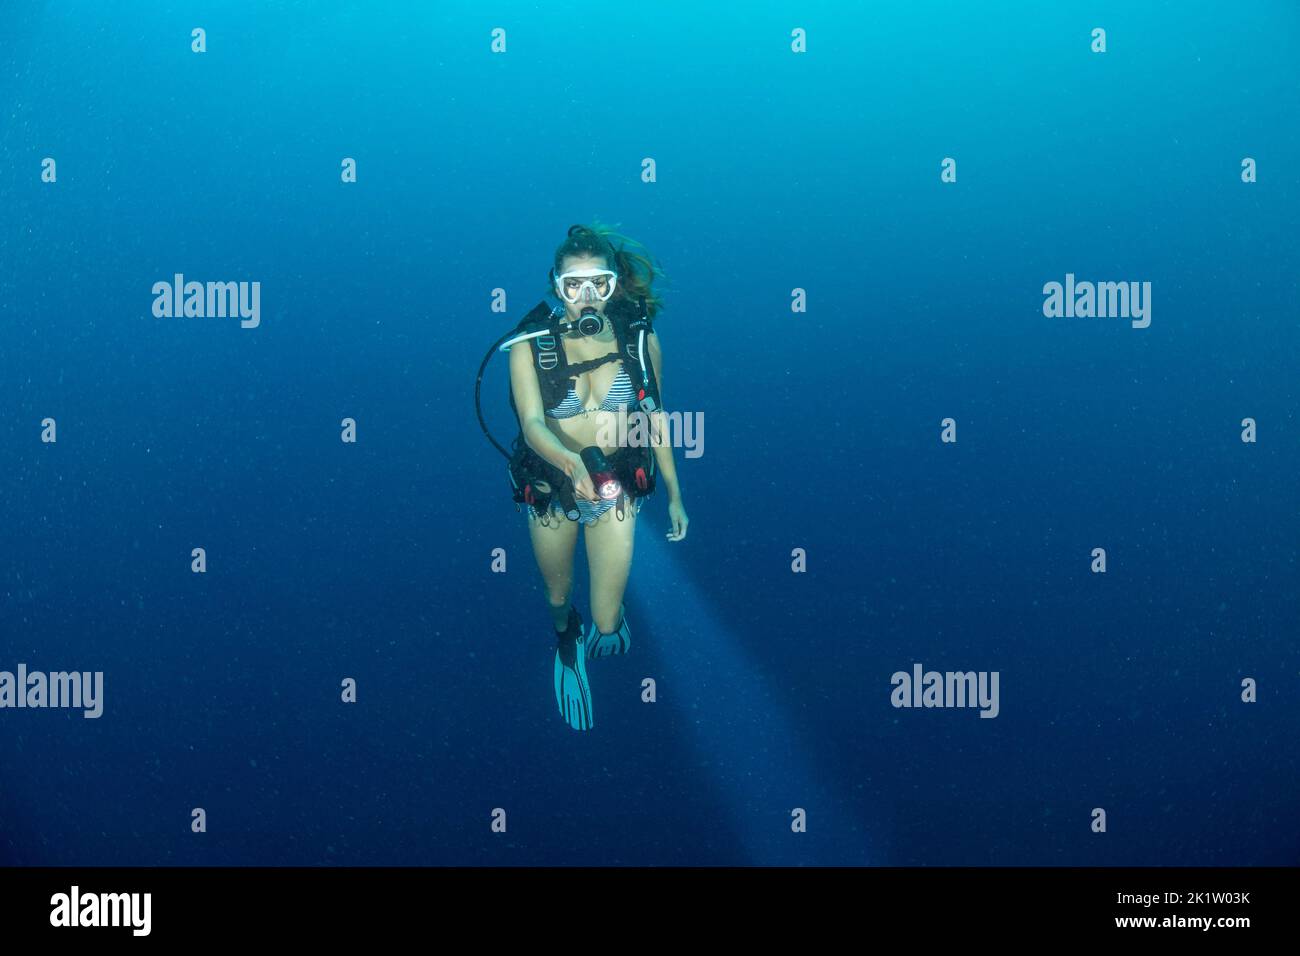 A female diver (MR) in mid water, open ocean, off the island of Yap, Micronesia. Stock Photo